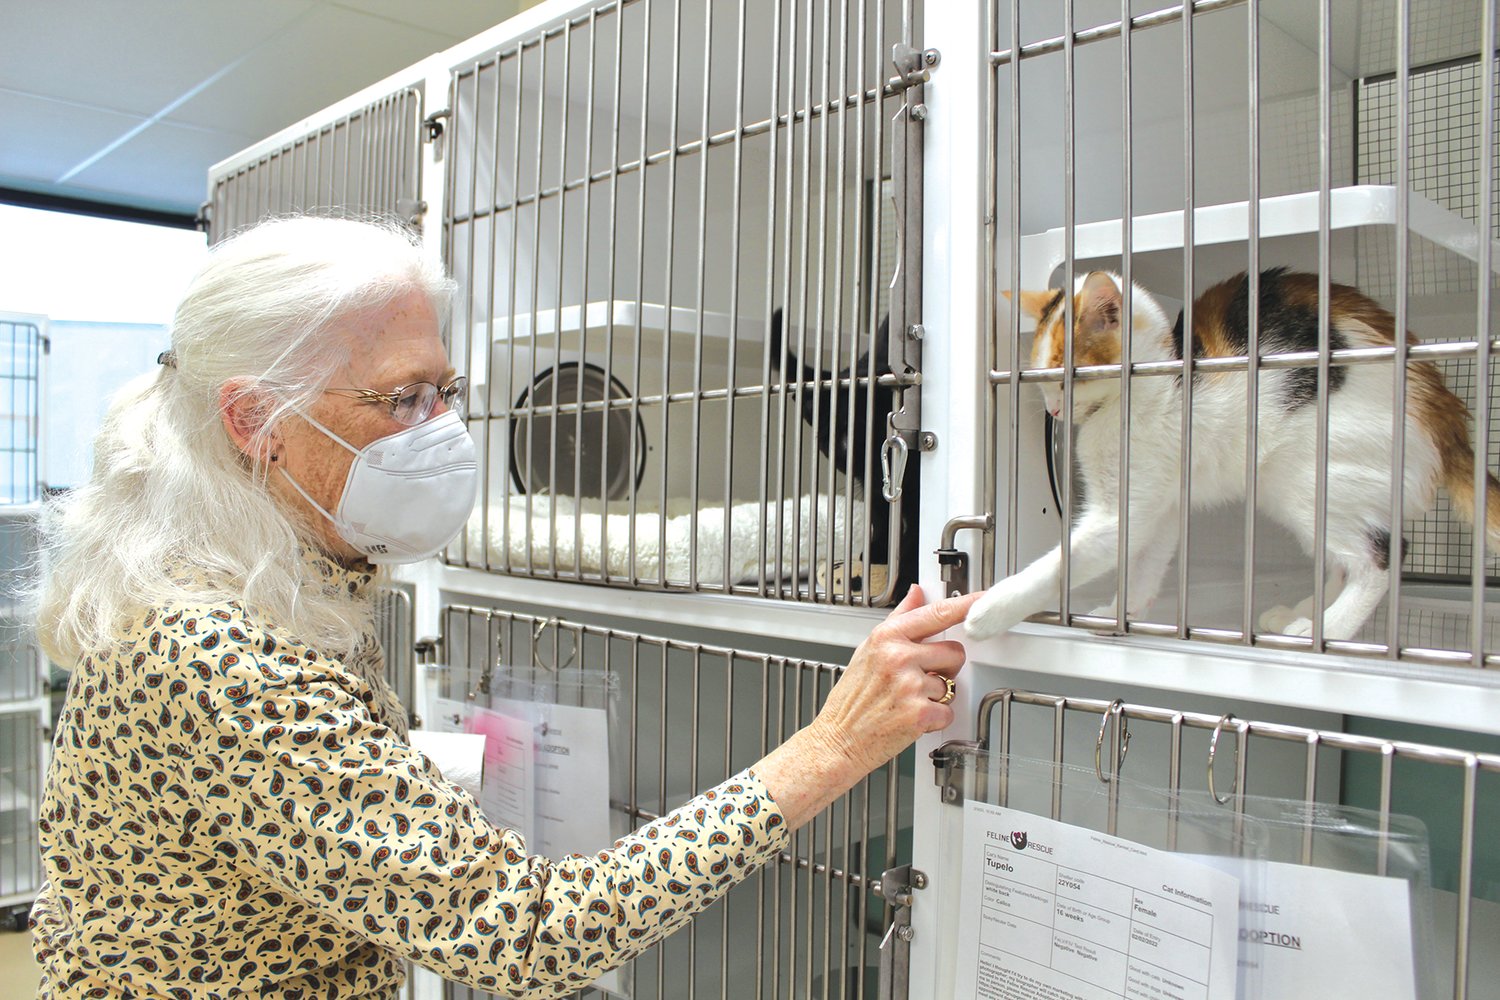 Volunteer Gail Frethem plays with Tupelo at the shelter. (Photo by Penny Fuller)